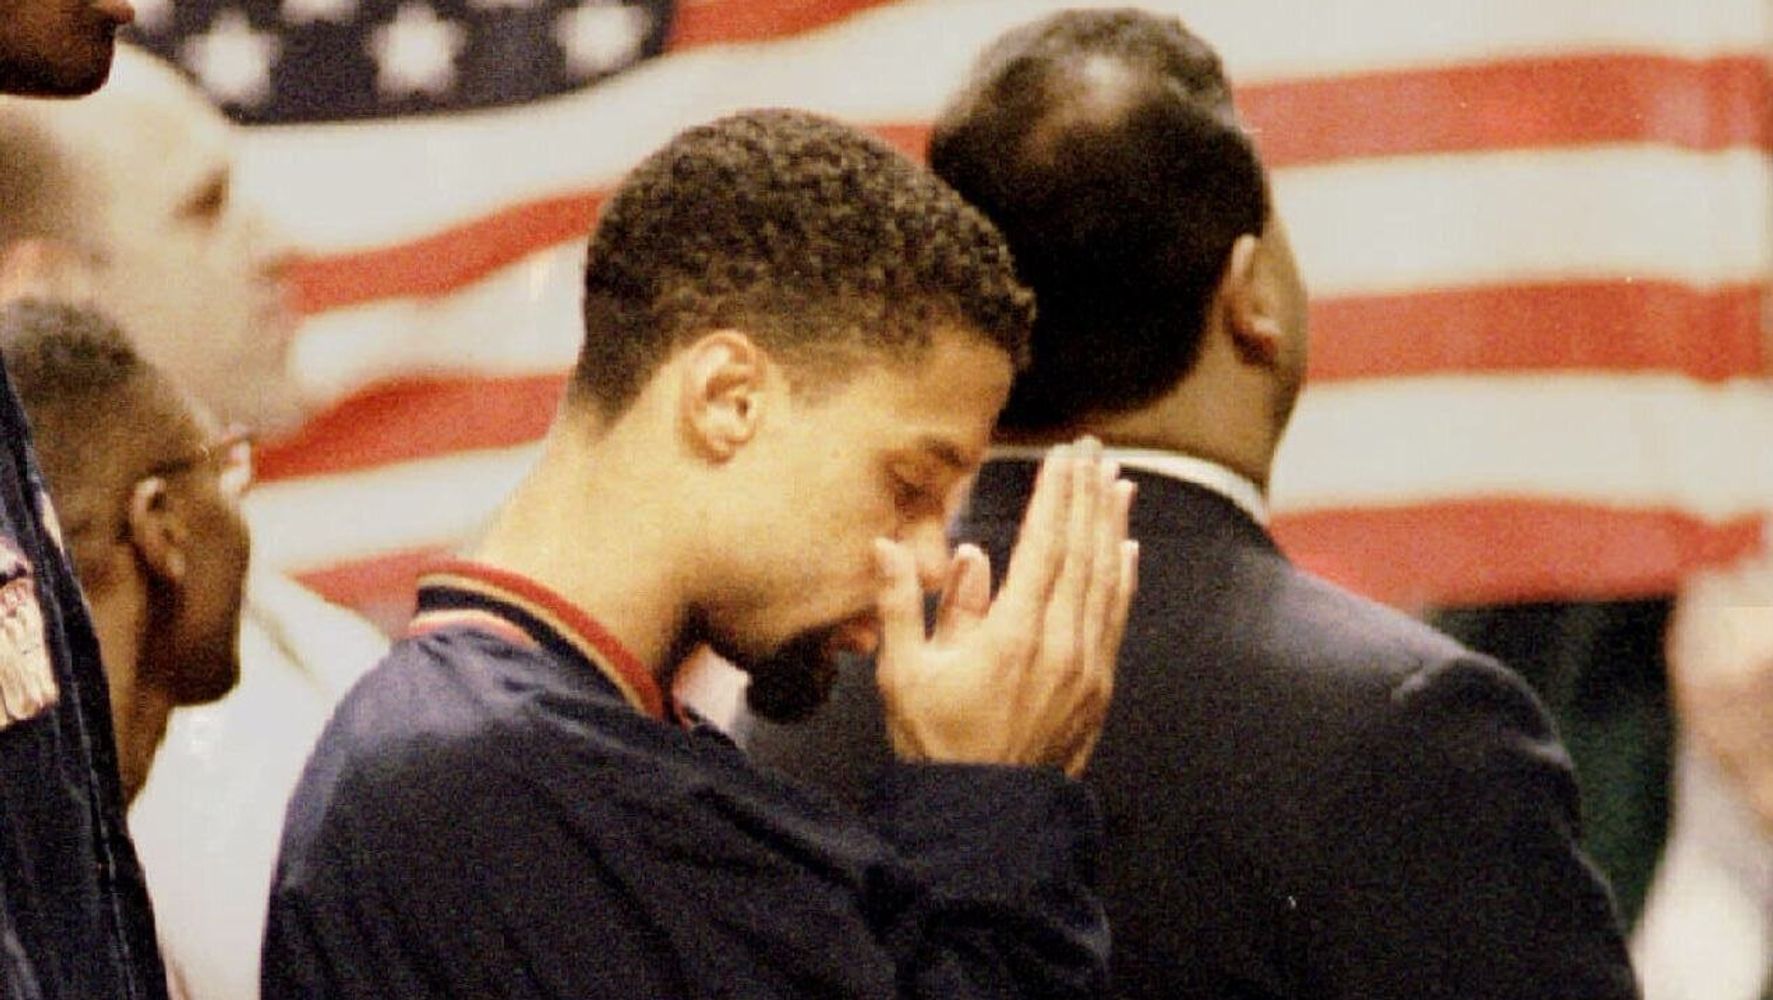 Mahmoud Abdul-Rauf: 'I lost millions because I couldn't keep my mouth shut', NBA